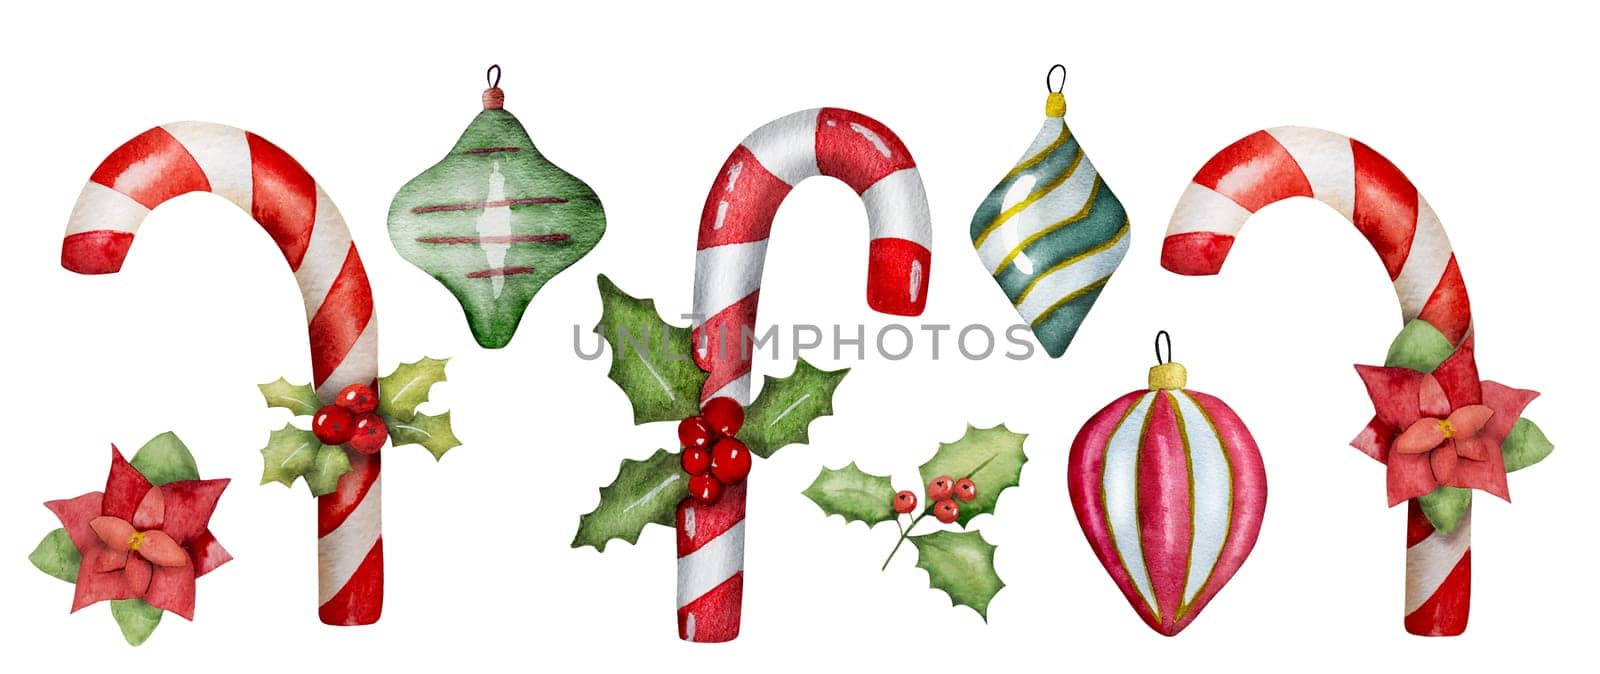 Watercolor Illustration Captures Christmas Candies And Tree Ornaments Beautifully